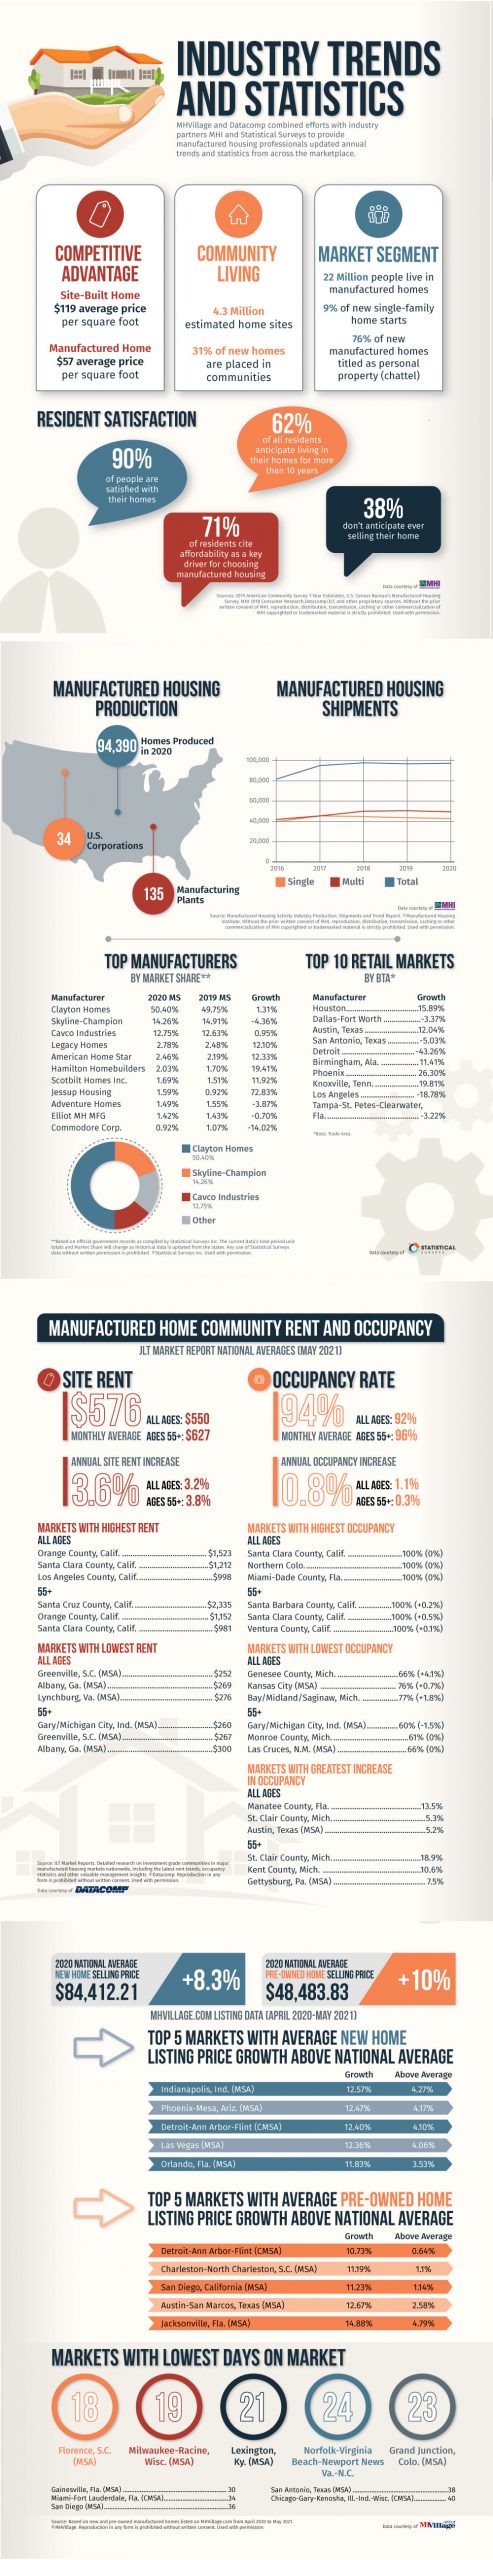 2021 manufactured housing industry statistics and trends inforgraphic